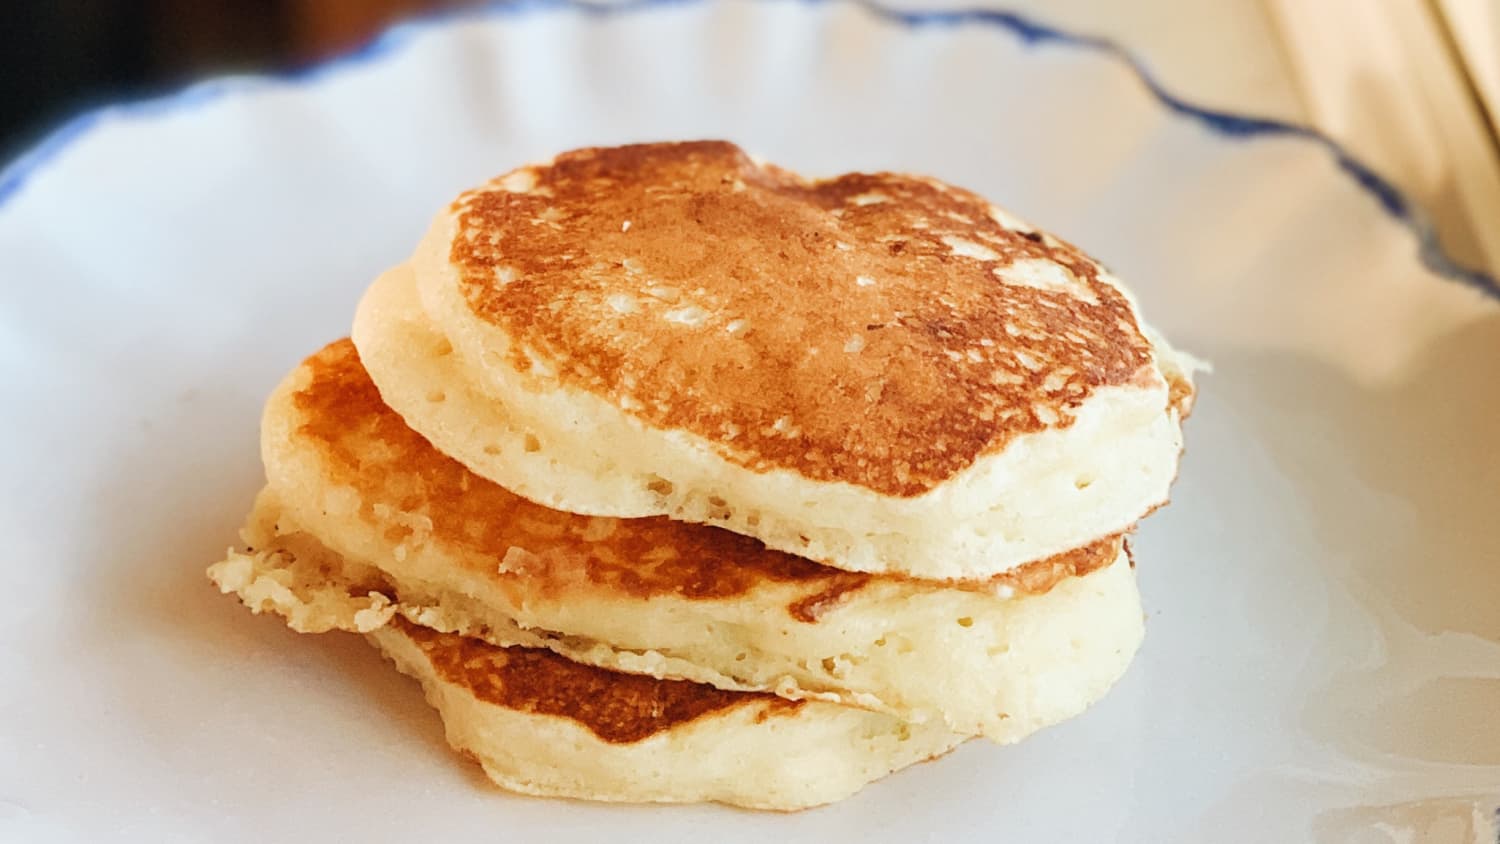 The Very Best Pancake Recipe I've Made for Years